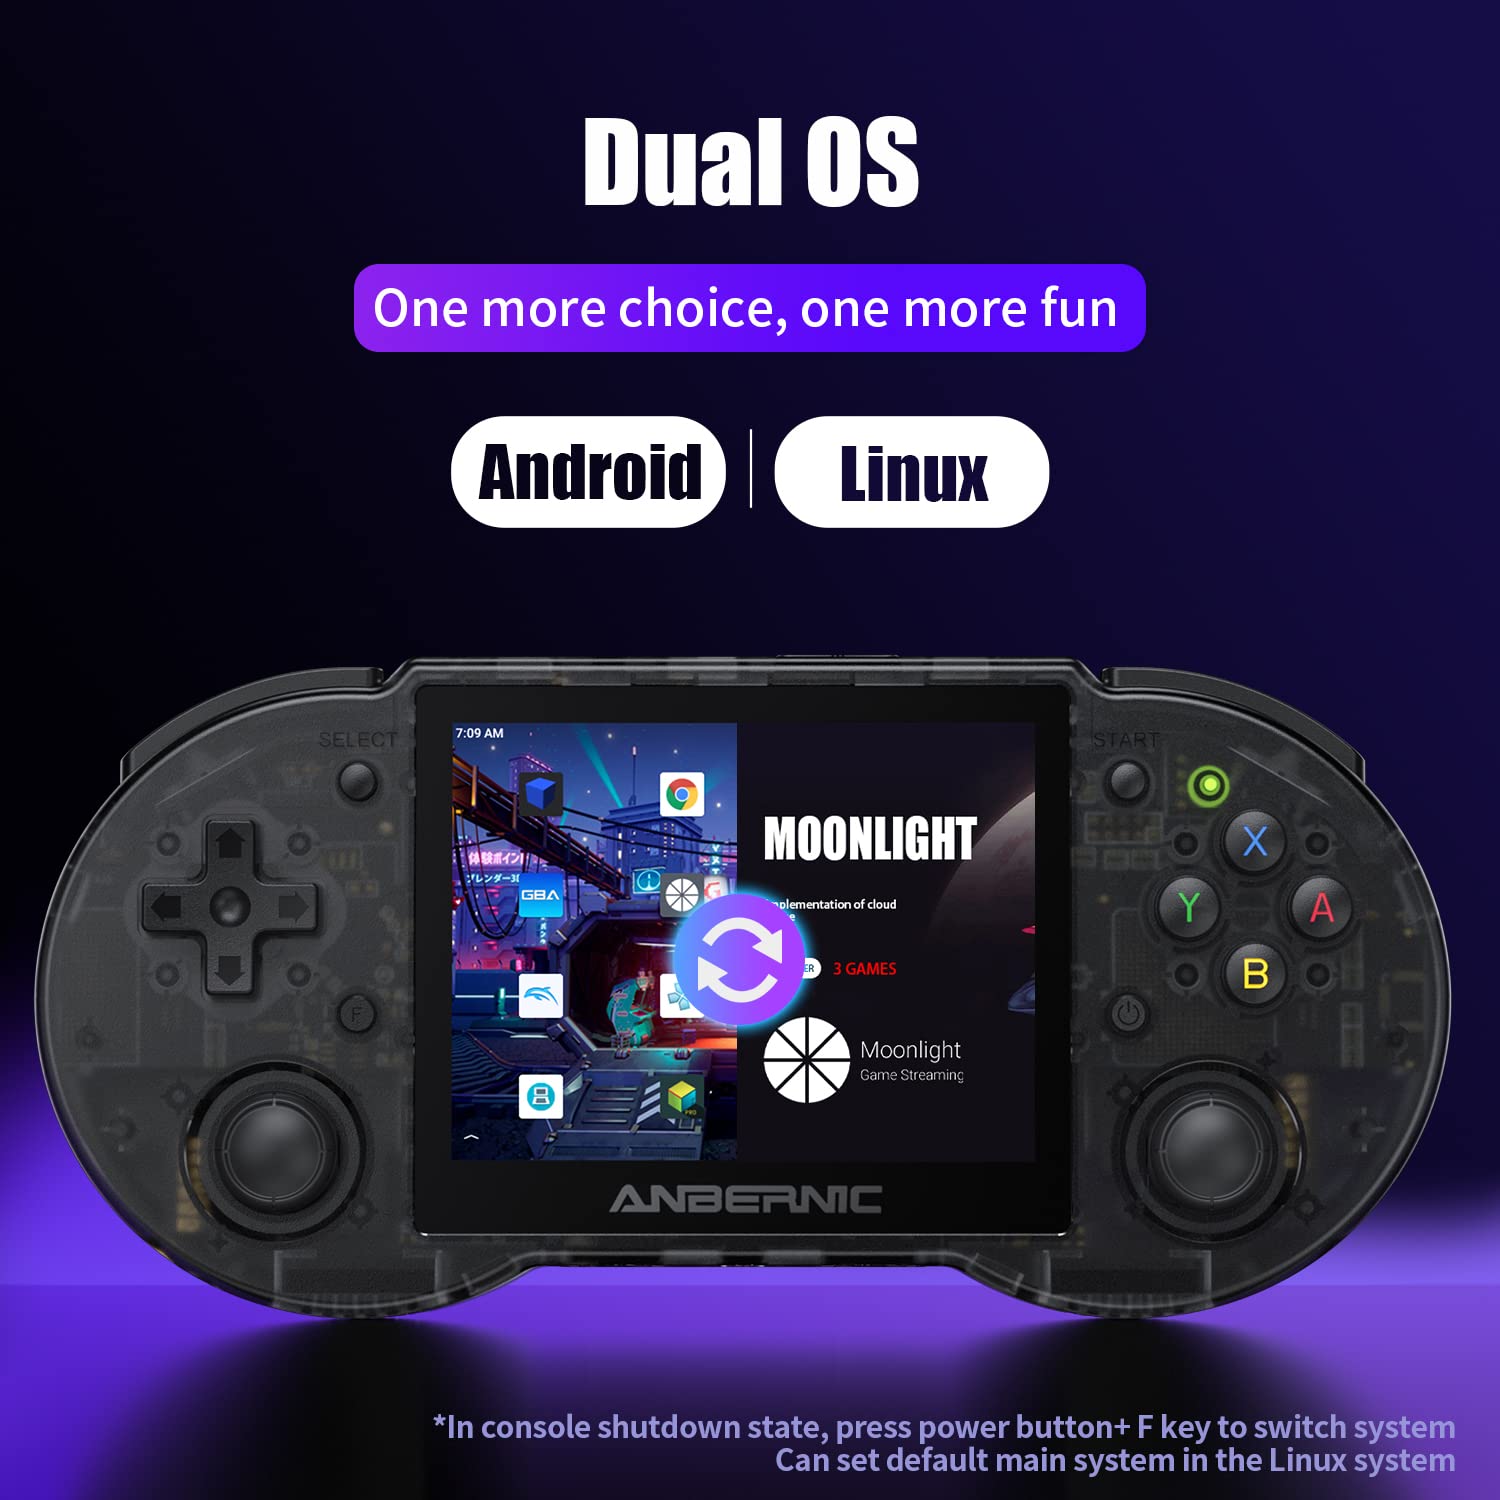 RG353P Retro Handheld Game Console pre-Installed 4452 Games with 64G TF Card, Dual OS Android 11 has Multi Touch, Linux Support Handle Mode, RG353P with 5G WiFi 4.2 Bluetooth (RG353P-Black-latest)